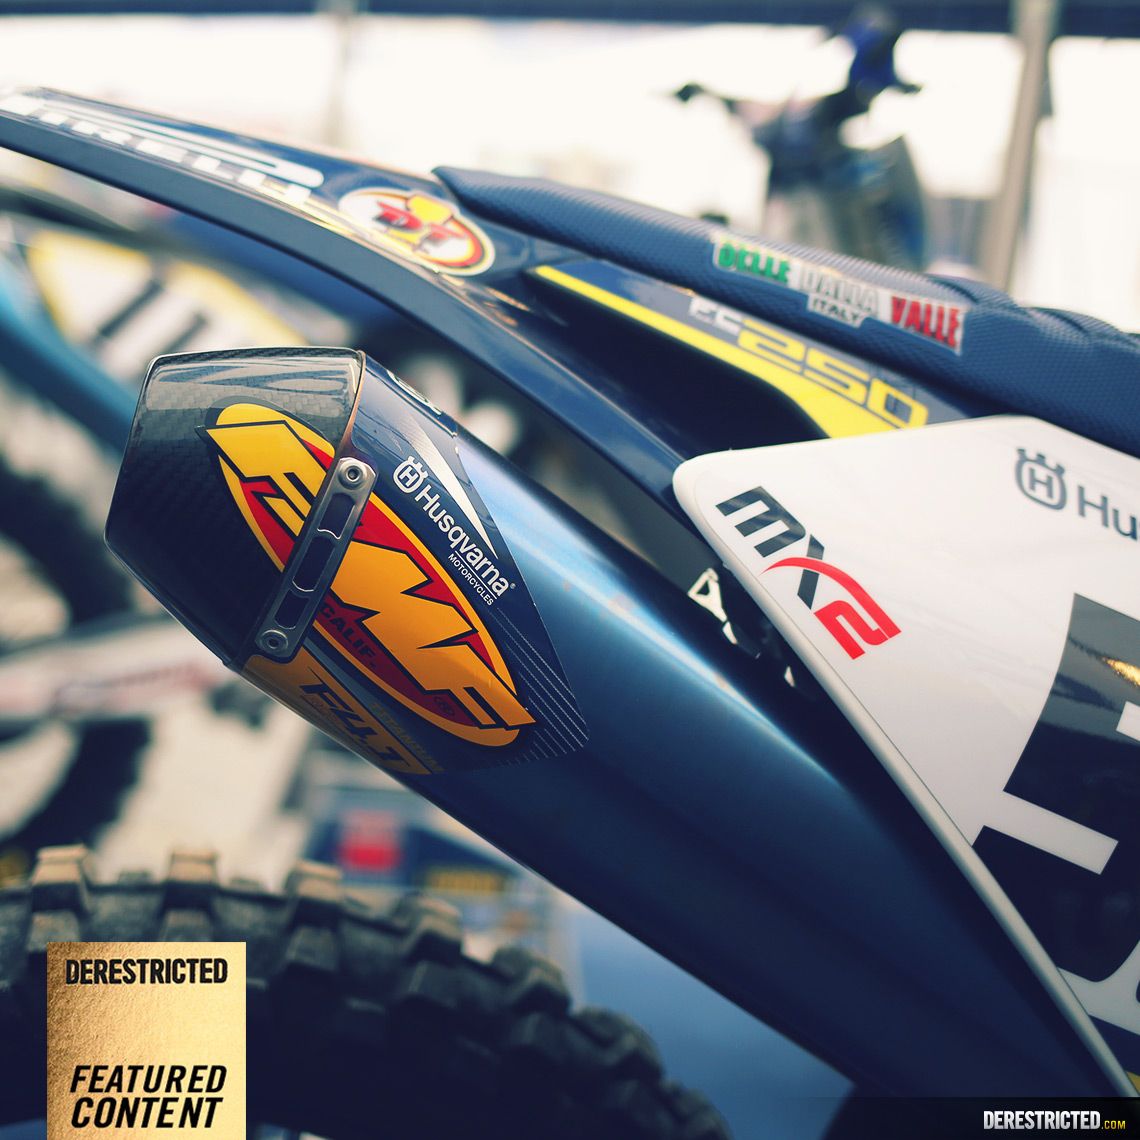 FMF Wallpaper. FMF Wallpaper, FMF 2 Stroke Wallpaper and FMF Exhaust Background